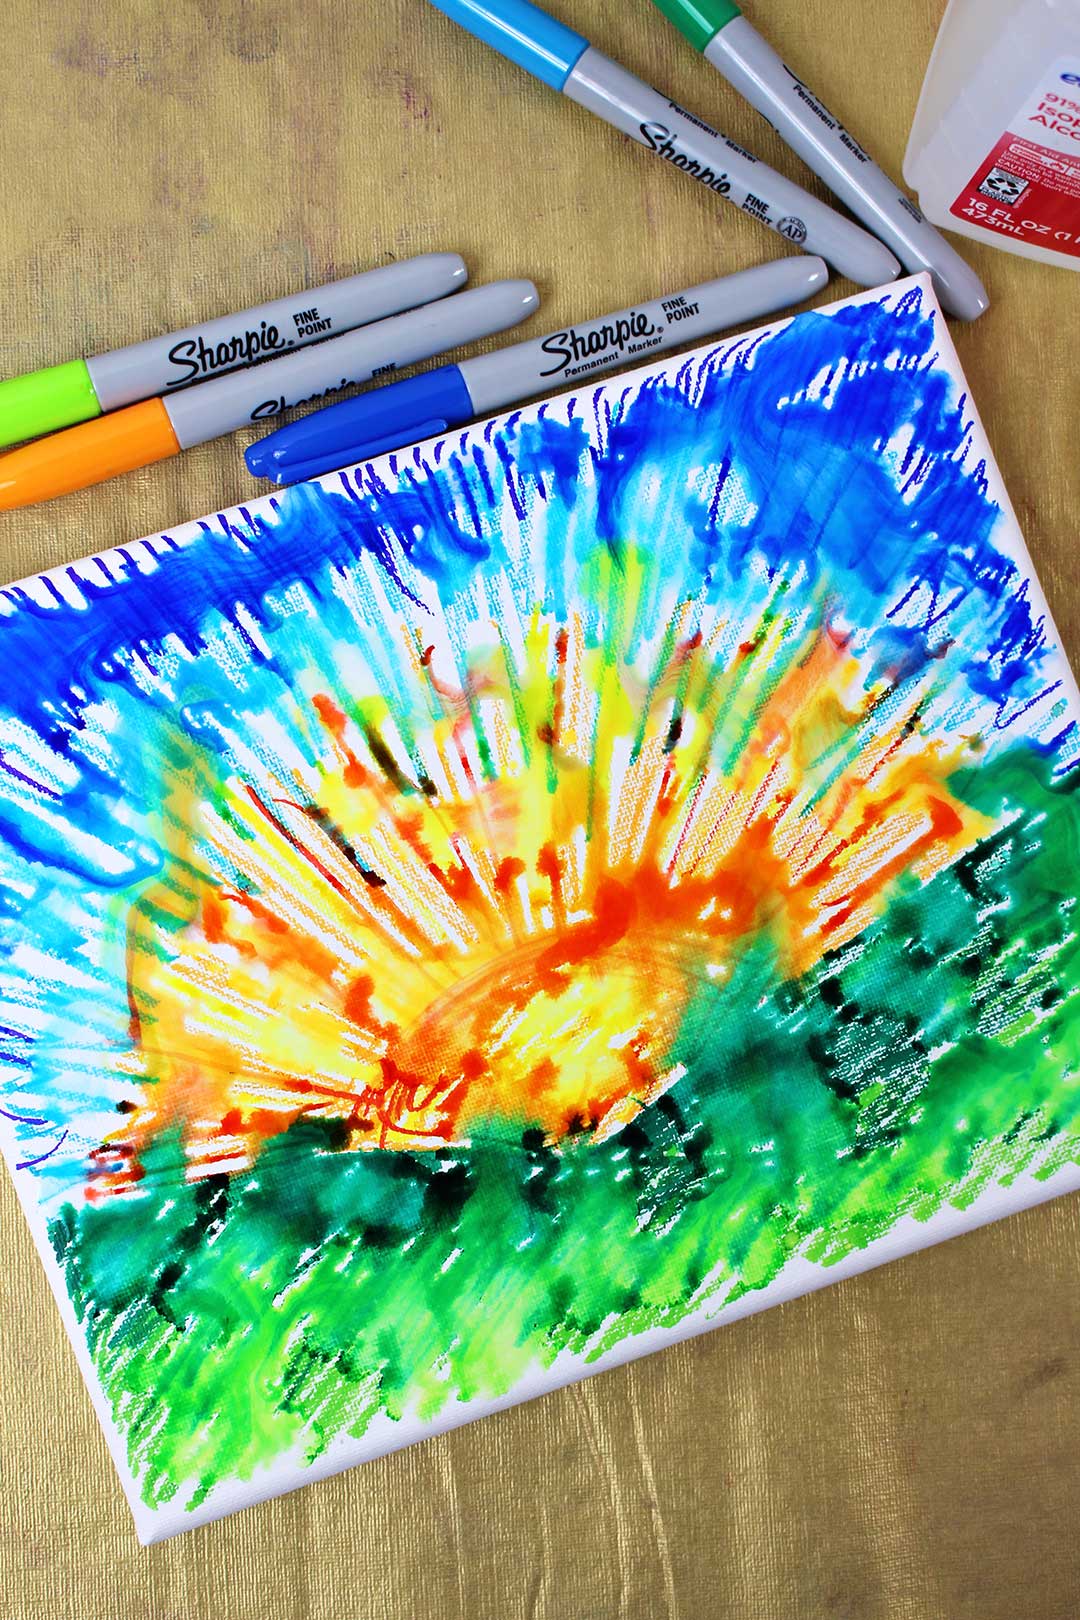 A sunset picture drawn with sharpies on canvas, starting to blur from drips of alcohol.